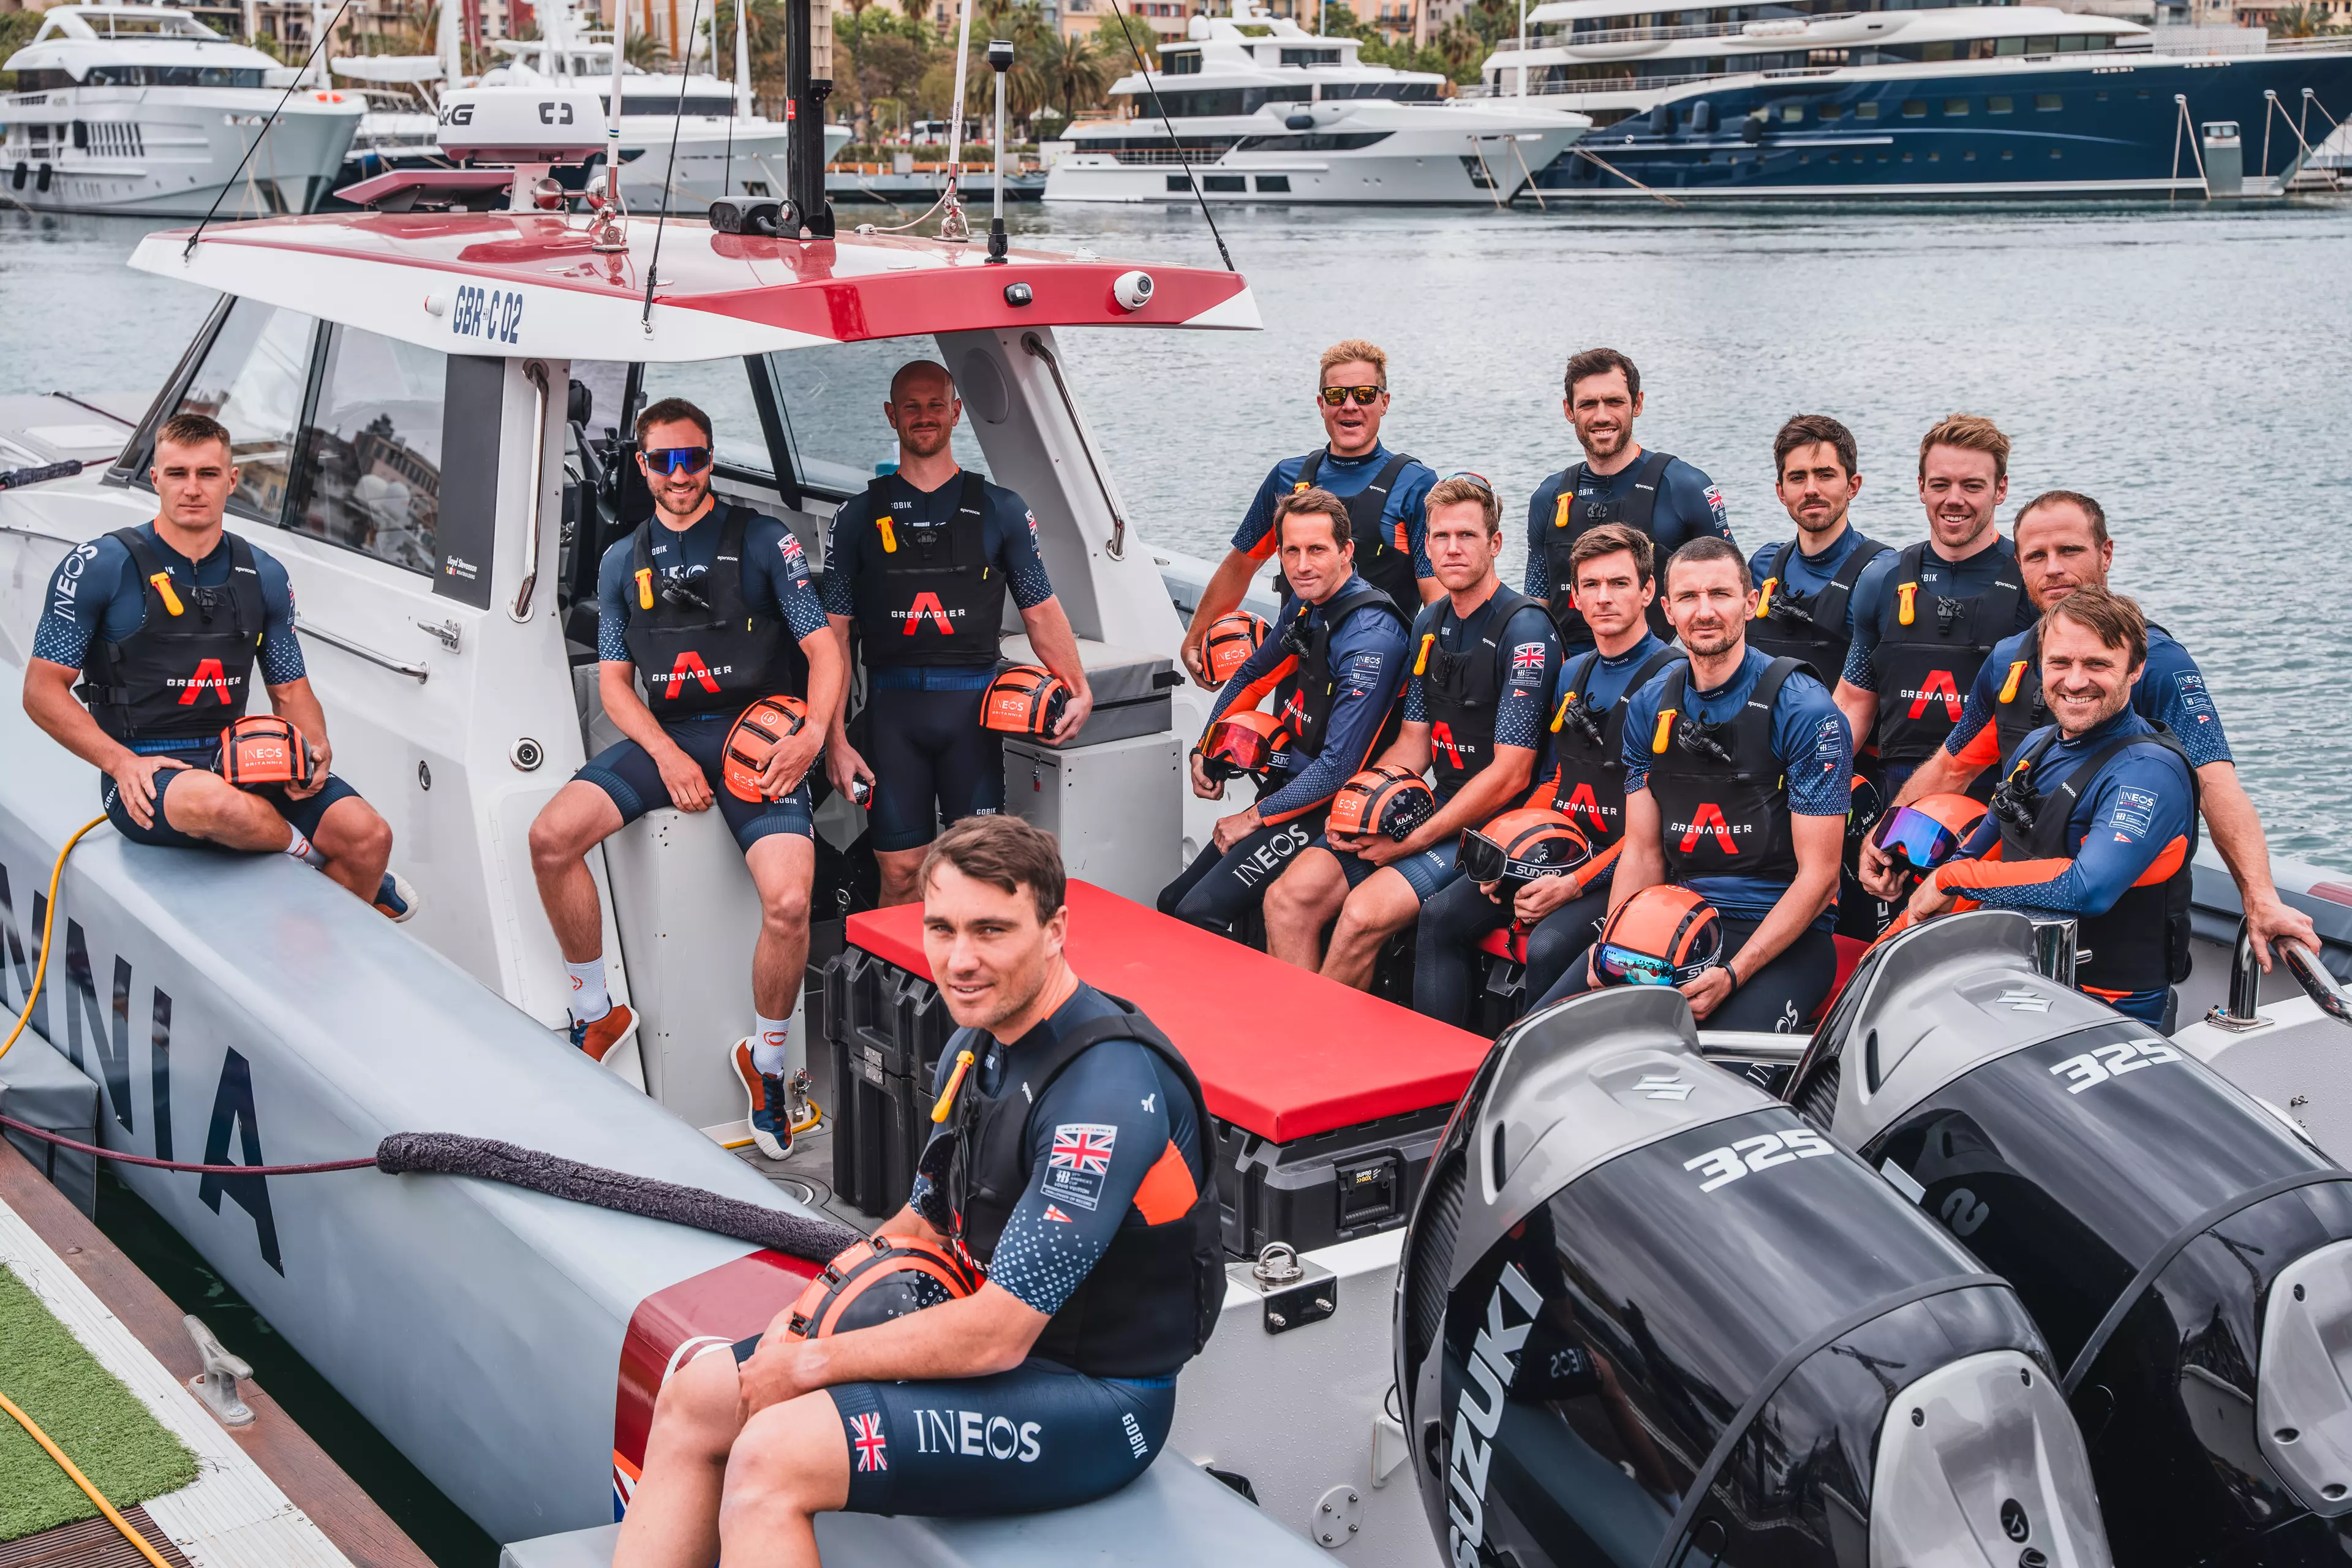 The INEOS Britannia team sat on their chase boat powered by 4 Suzuki outboards